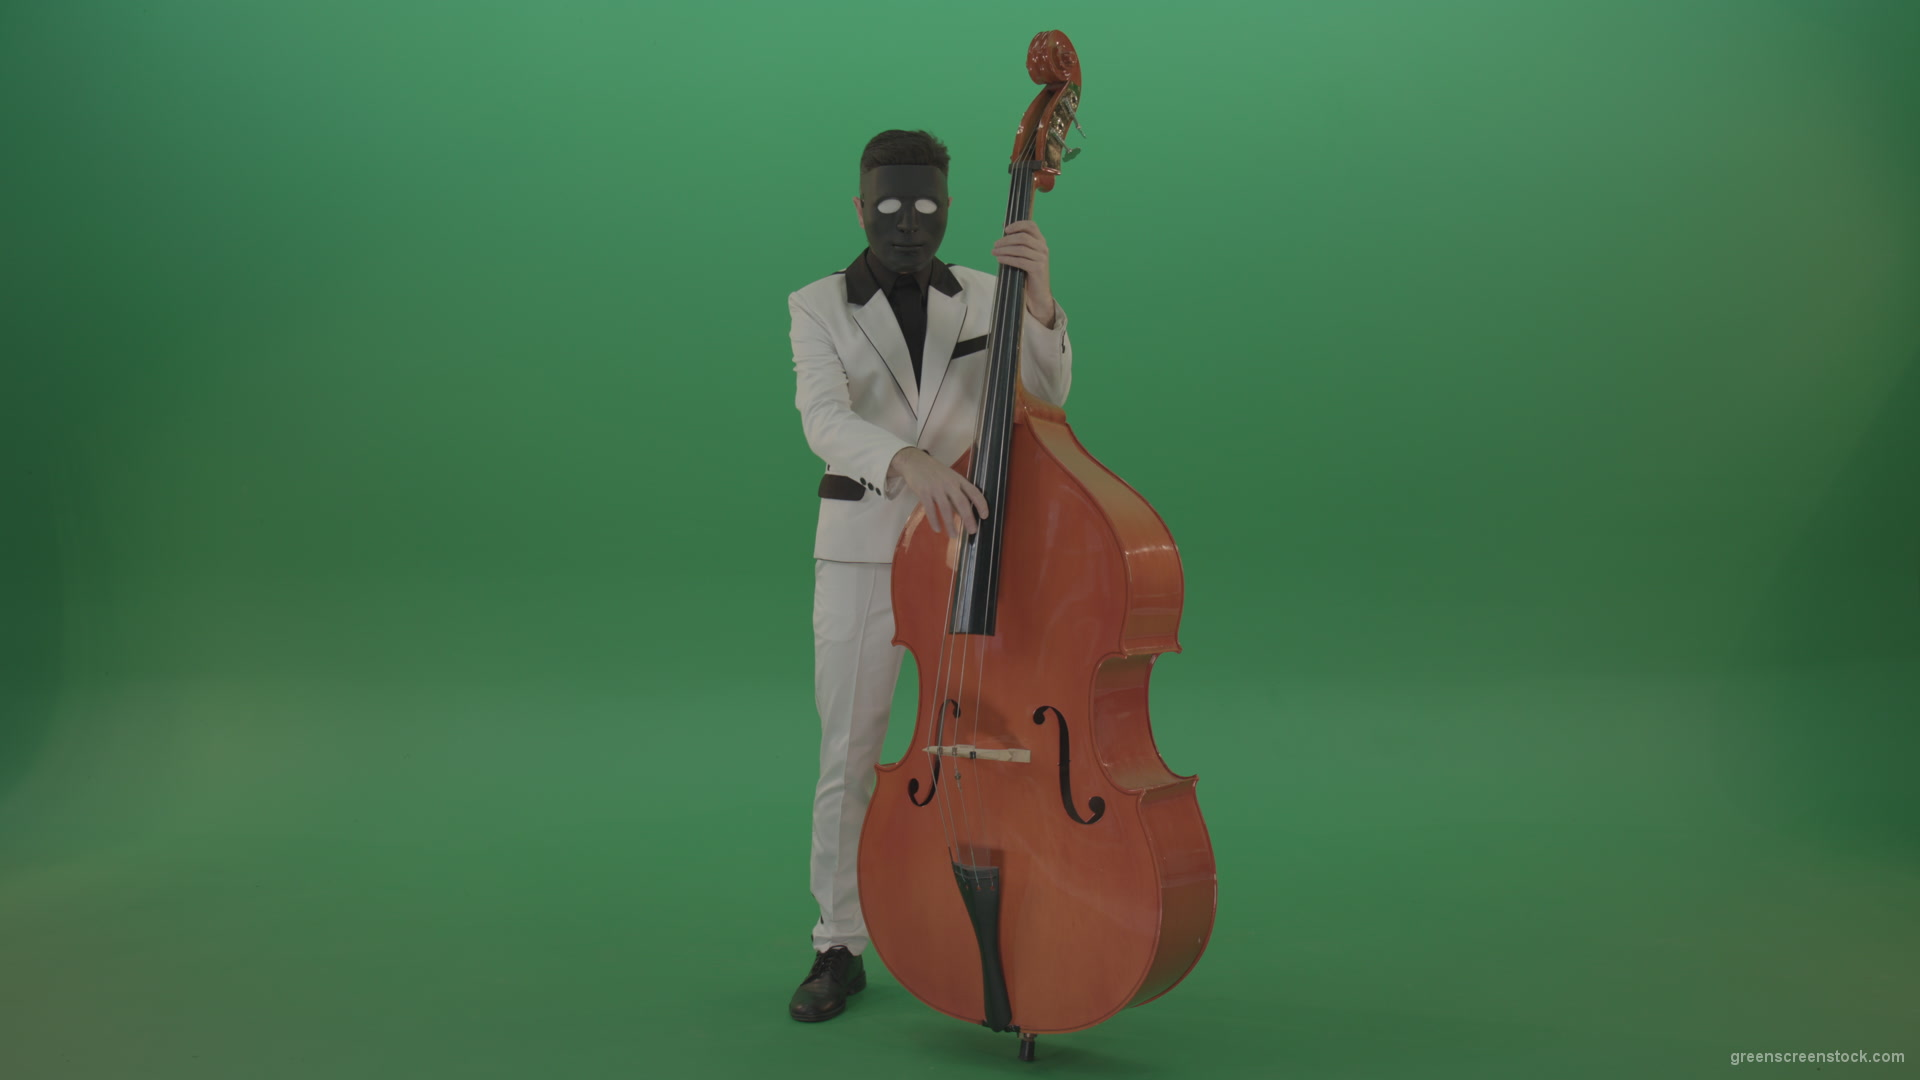 Man-in-white-costume-and-blac-mask-play-jazz-music-on-double-bass-orchestra-music-instument-isolated-on-green-screen_004 Green Screen Stock